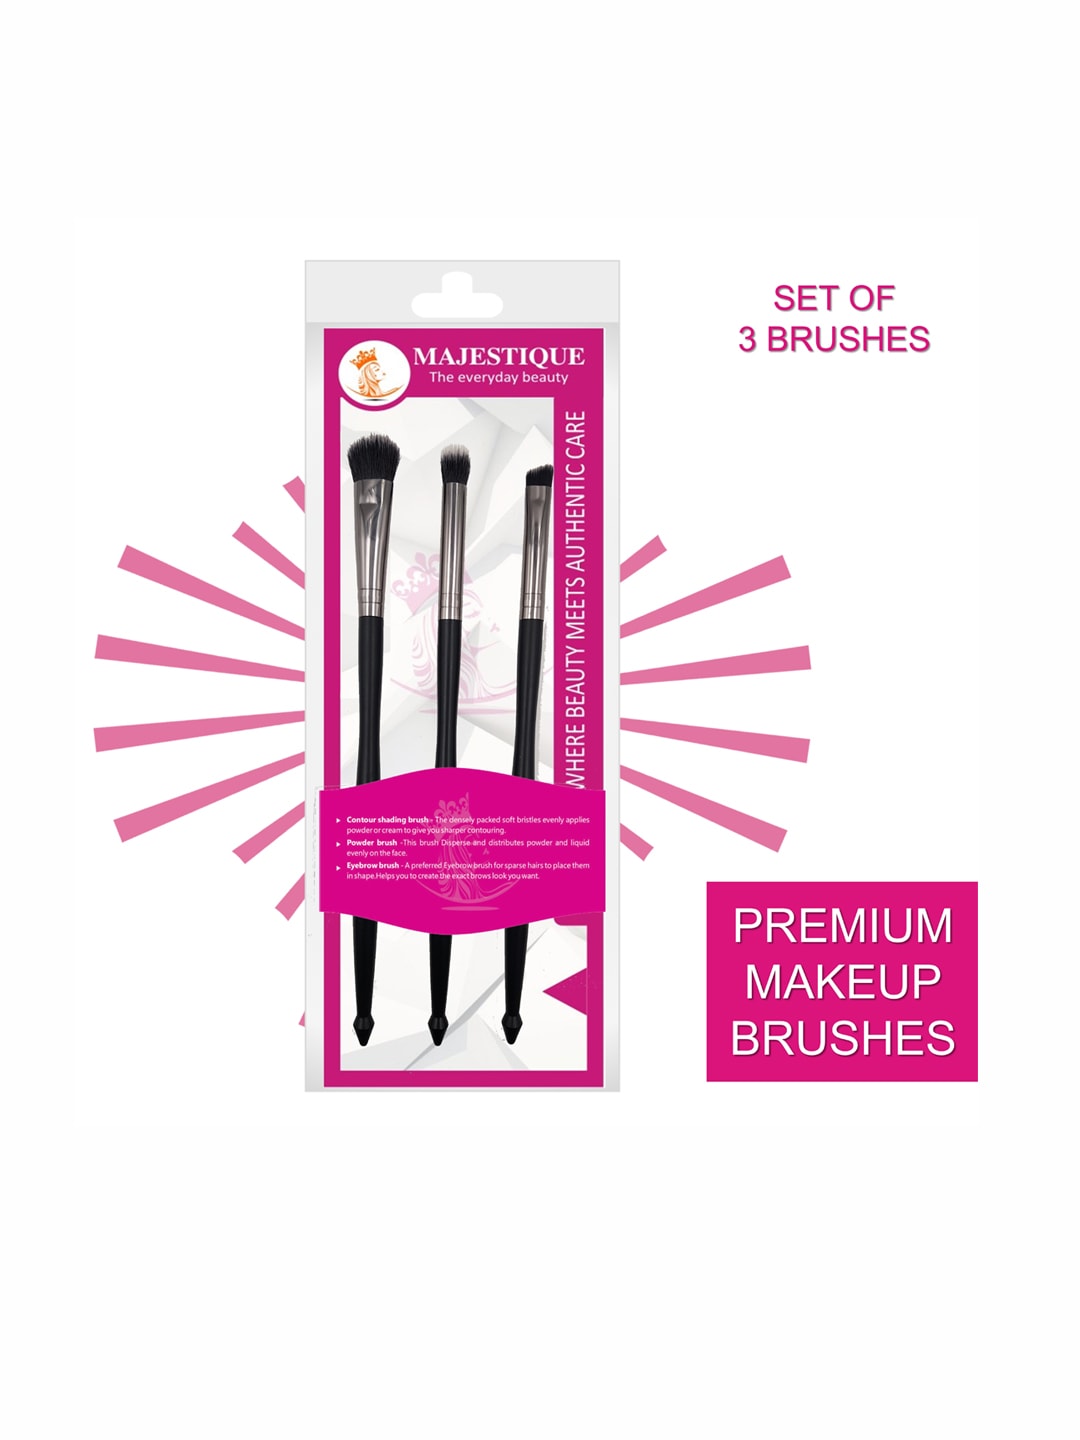 MAJESTIQUE Black Set Of 3 Contour & Eyebrow Makeup Brushes Price in India